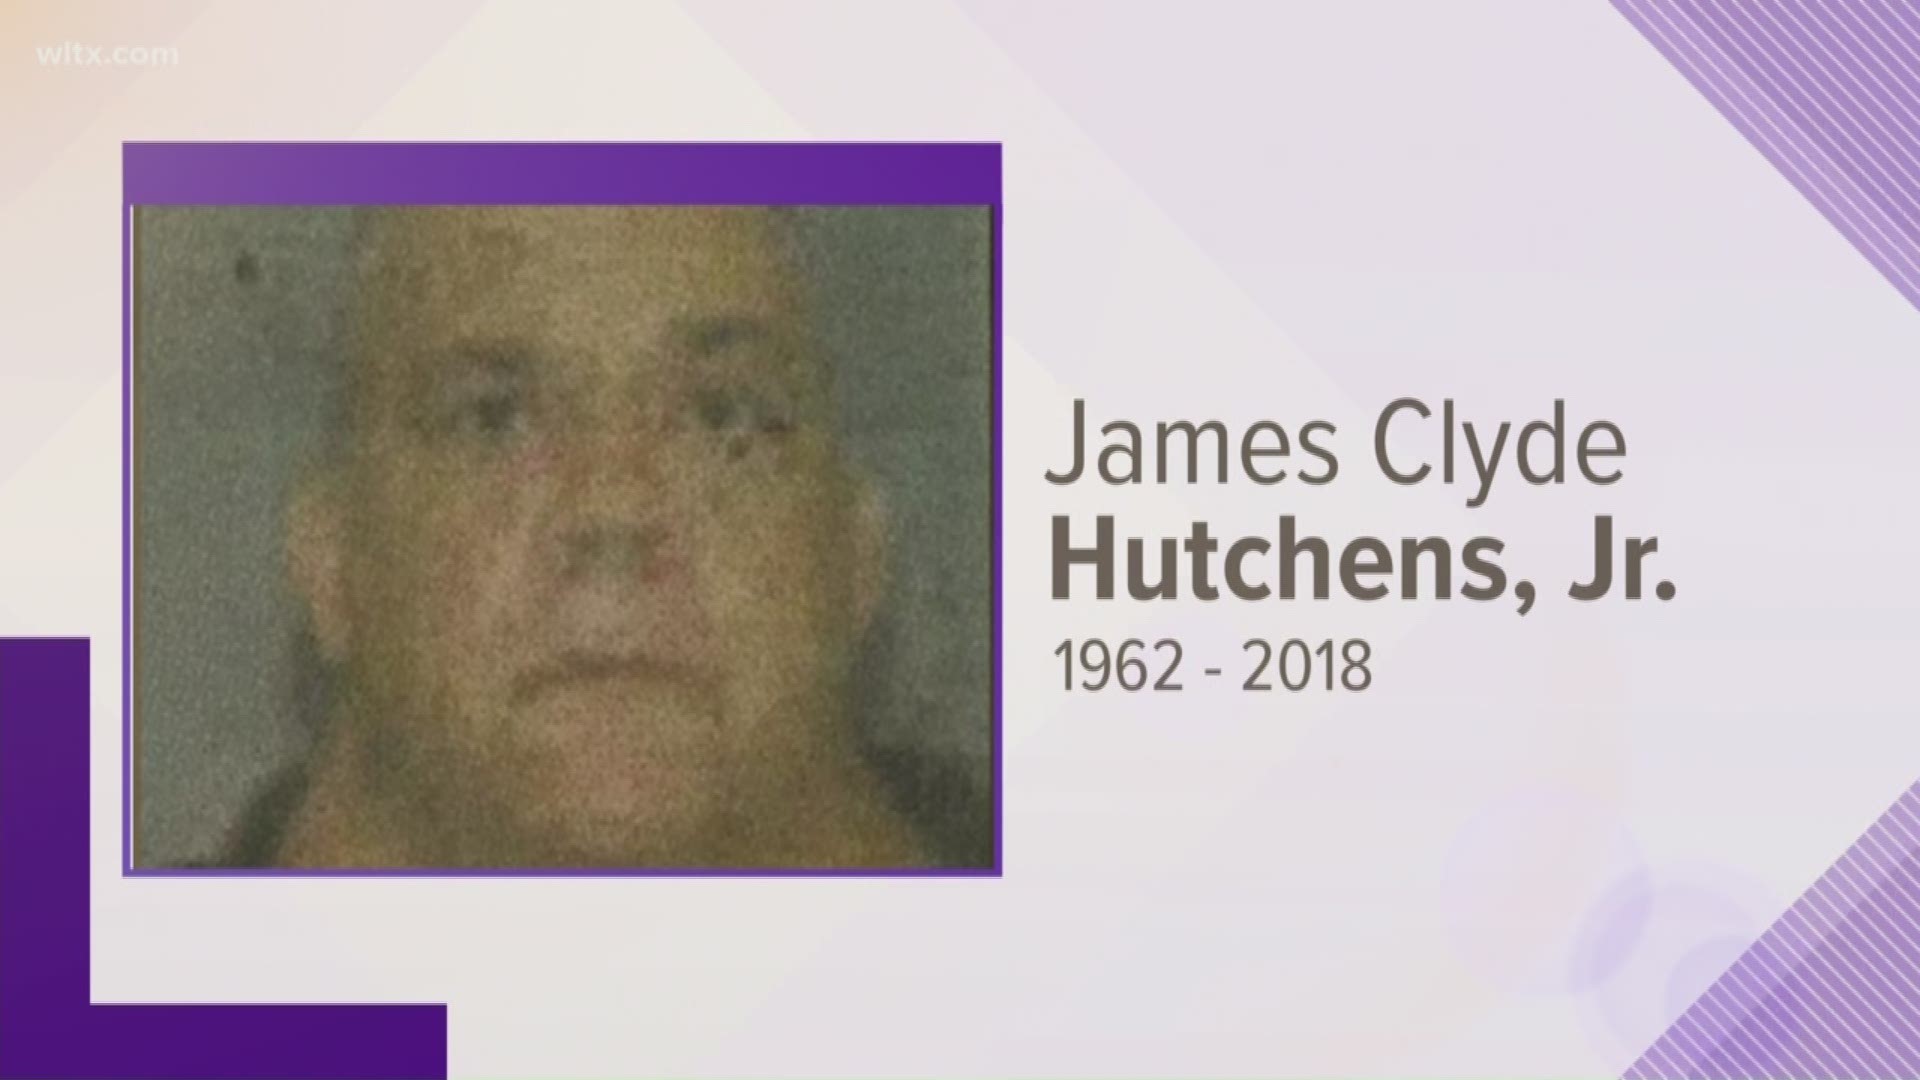 James Clyde Hutchens, Jr., 56, died of natural causes on September 13 at a shelter for homeless veterans in Lexington County